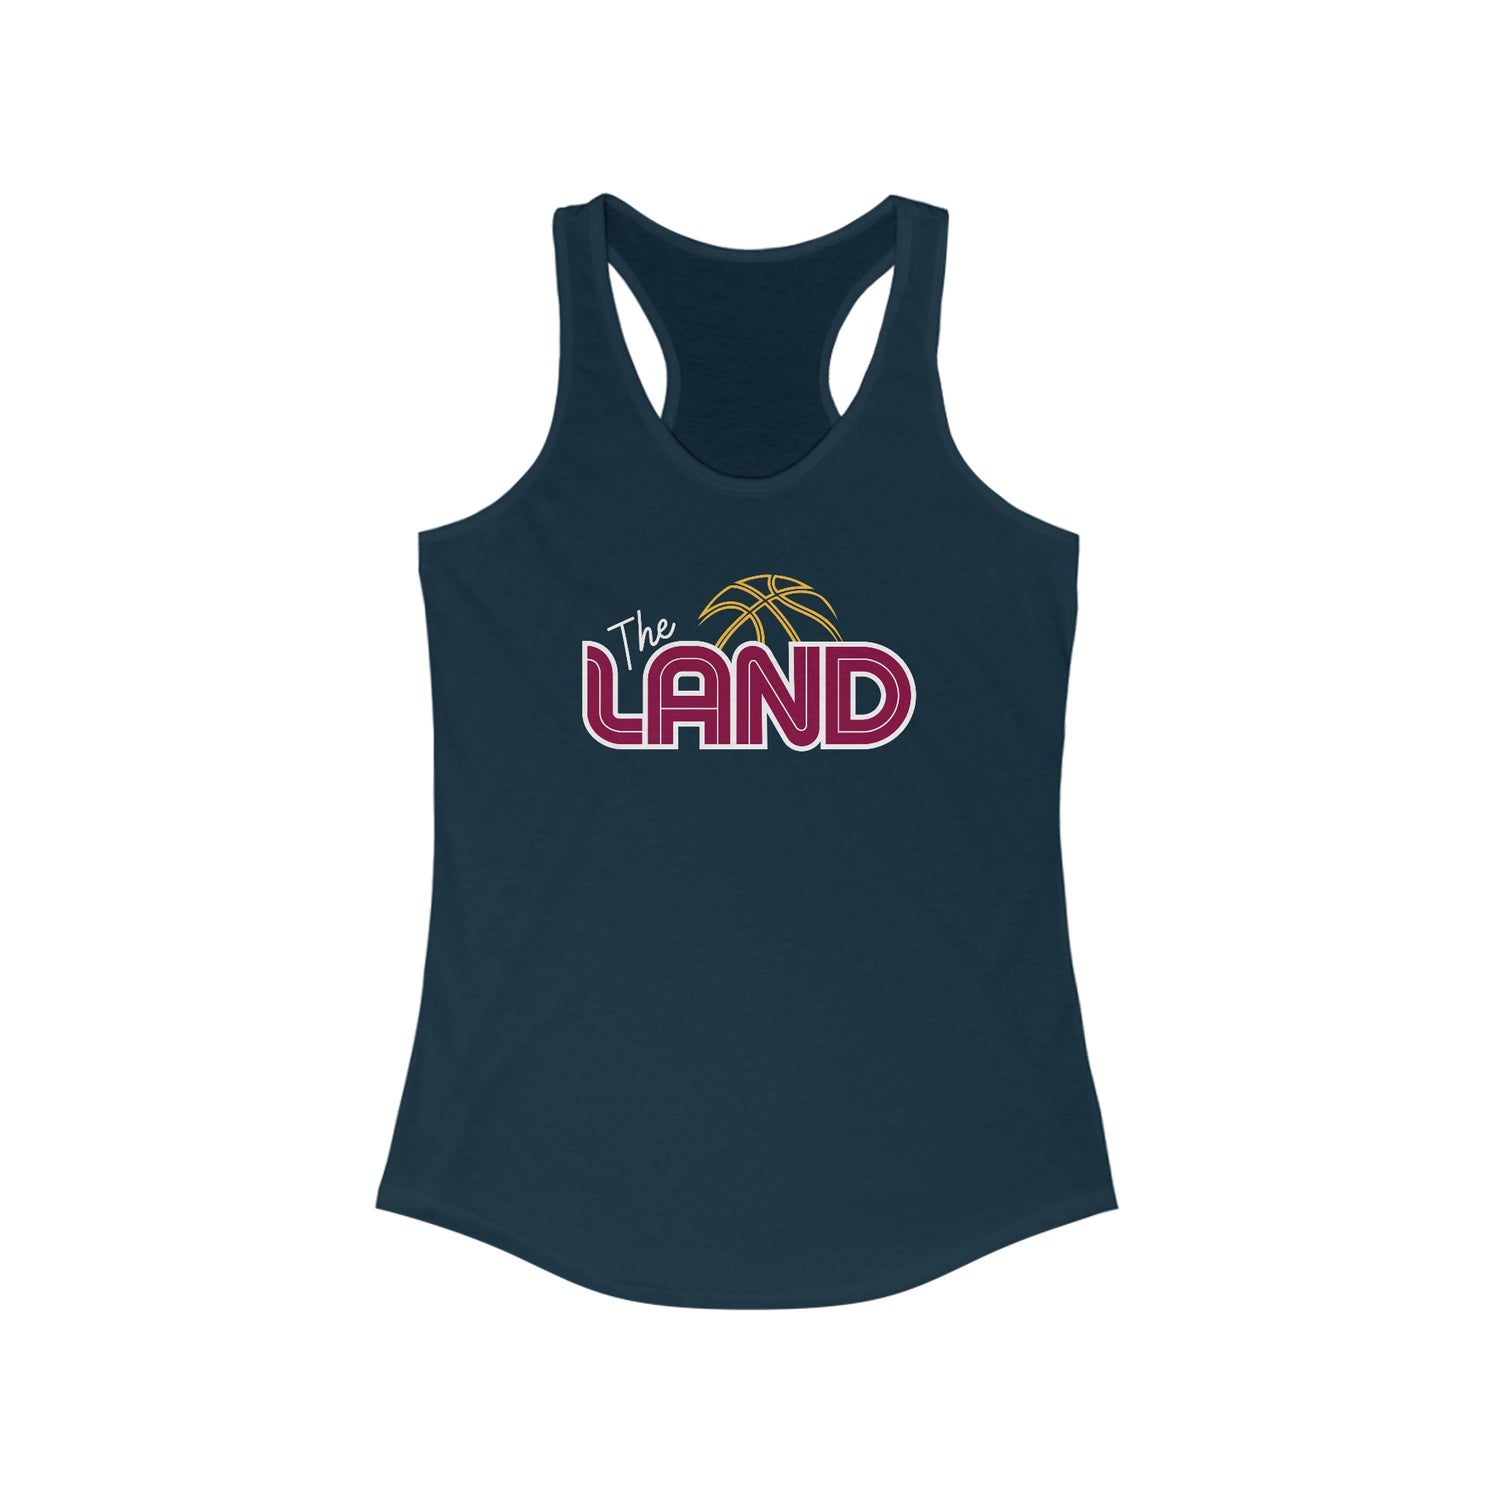 The Land Cleveland Tank Top